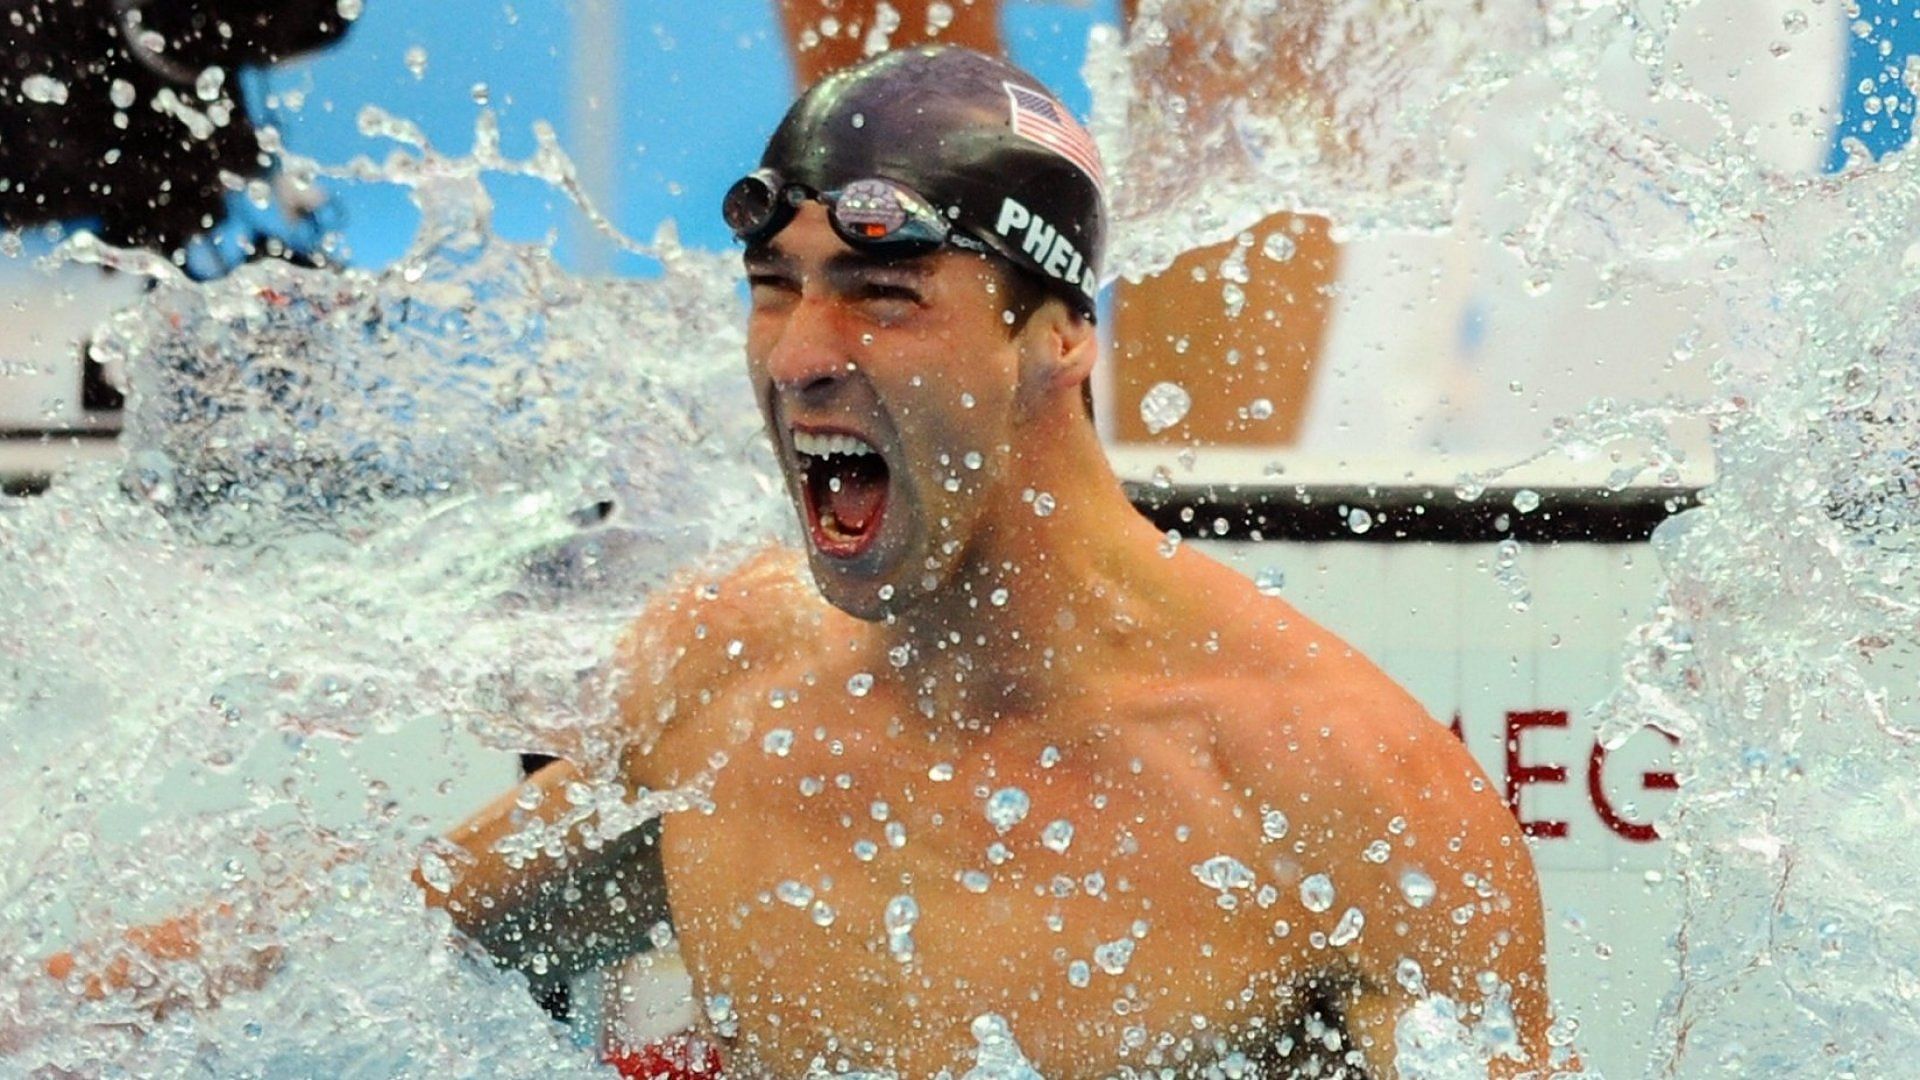 With 28 medals, Michael Phelps is the most decorated Olympian ever